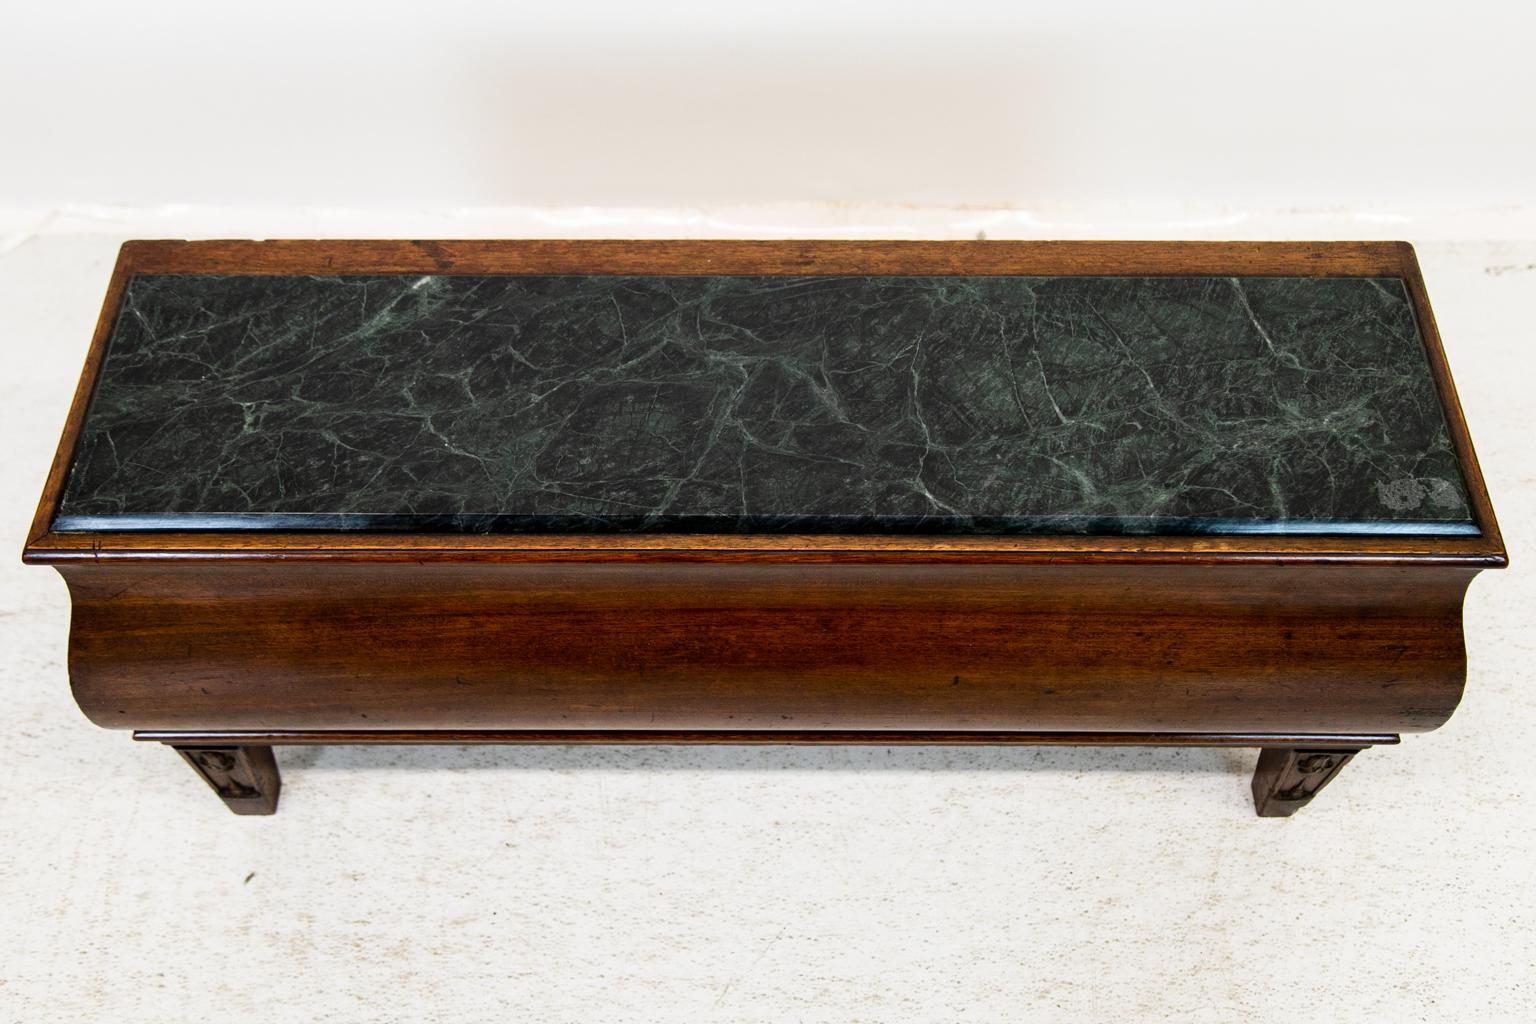 This English marble top bench / table has a verde marble top with a bombay shaped front and sides that terminate in carved tapered legs. The interior is hollow.